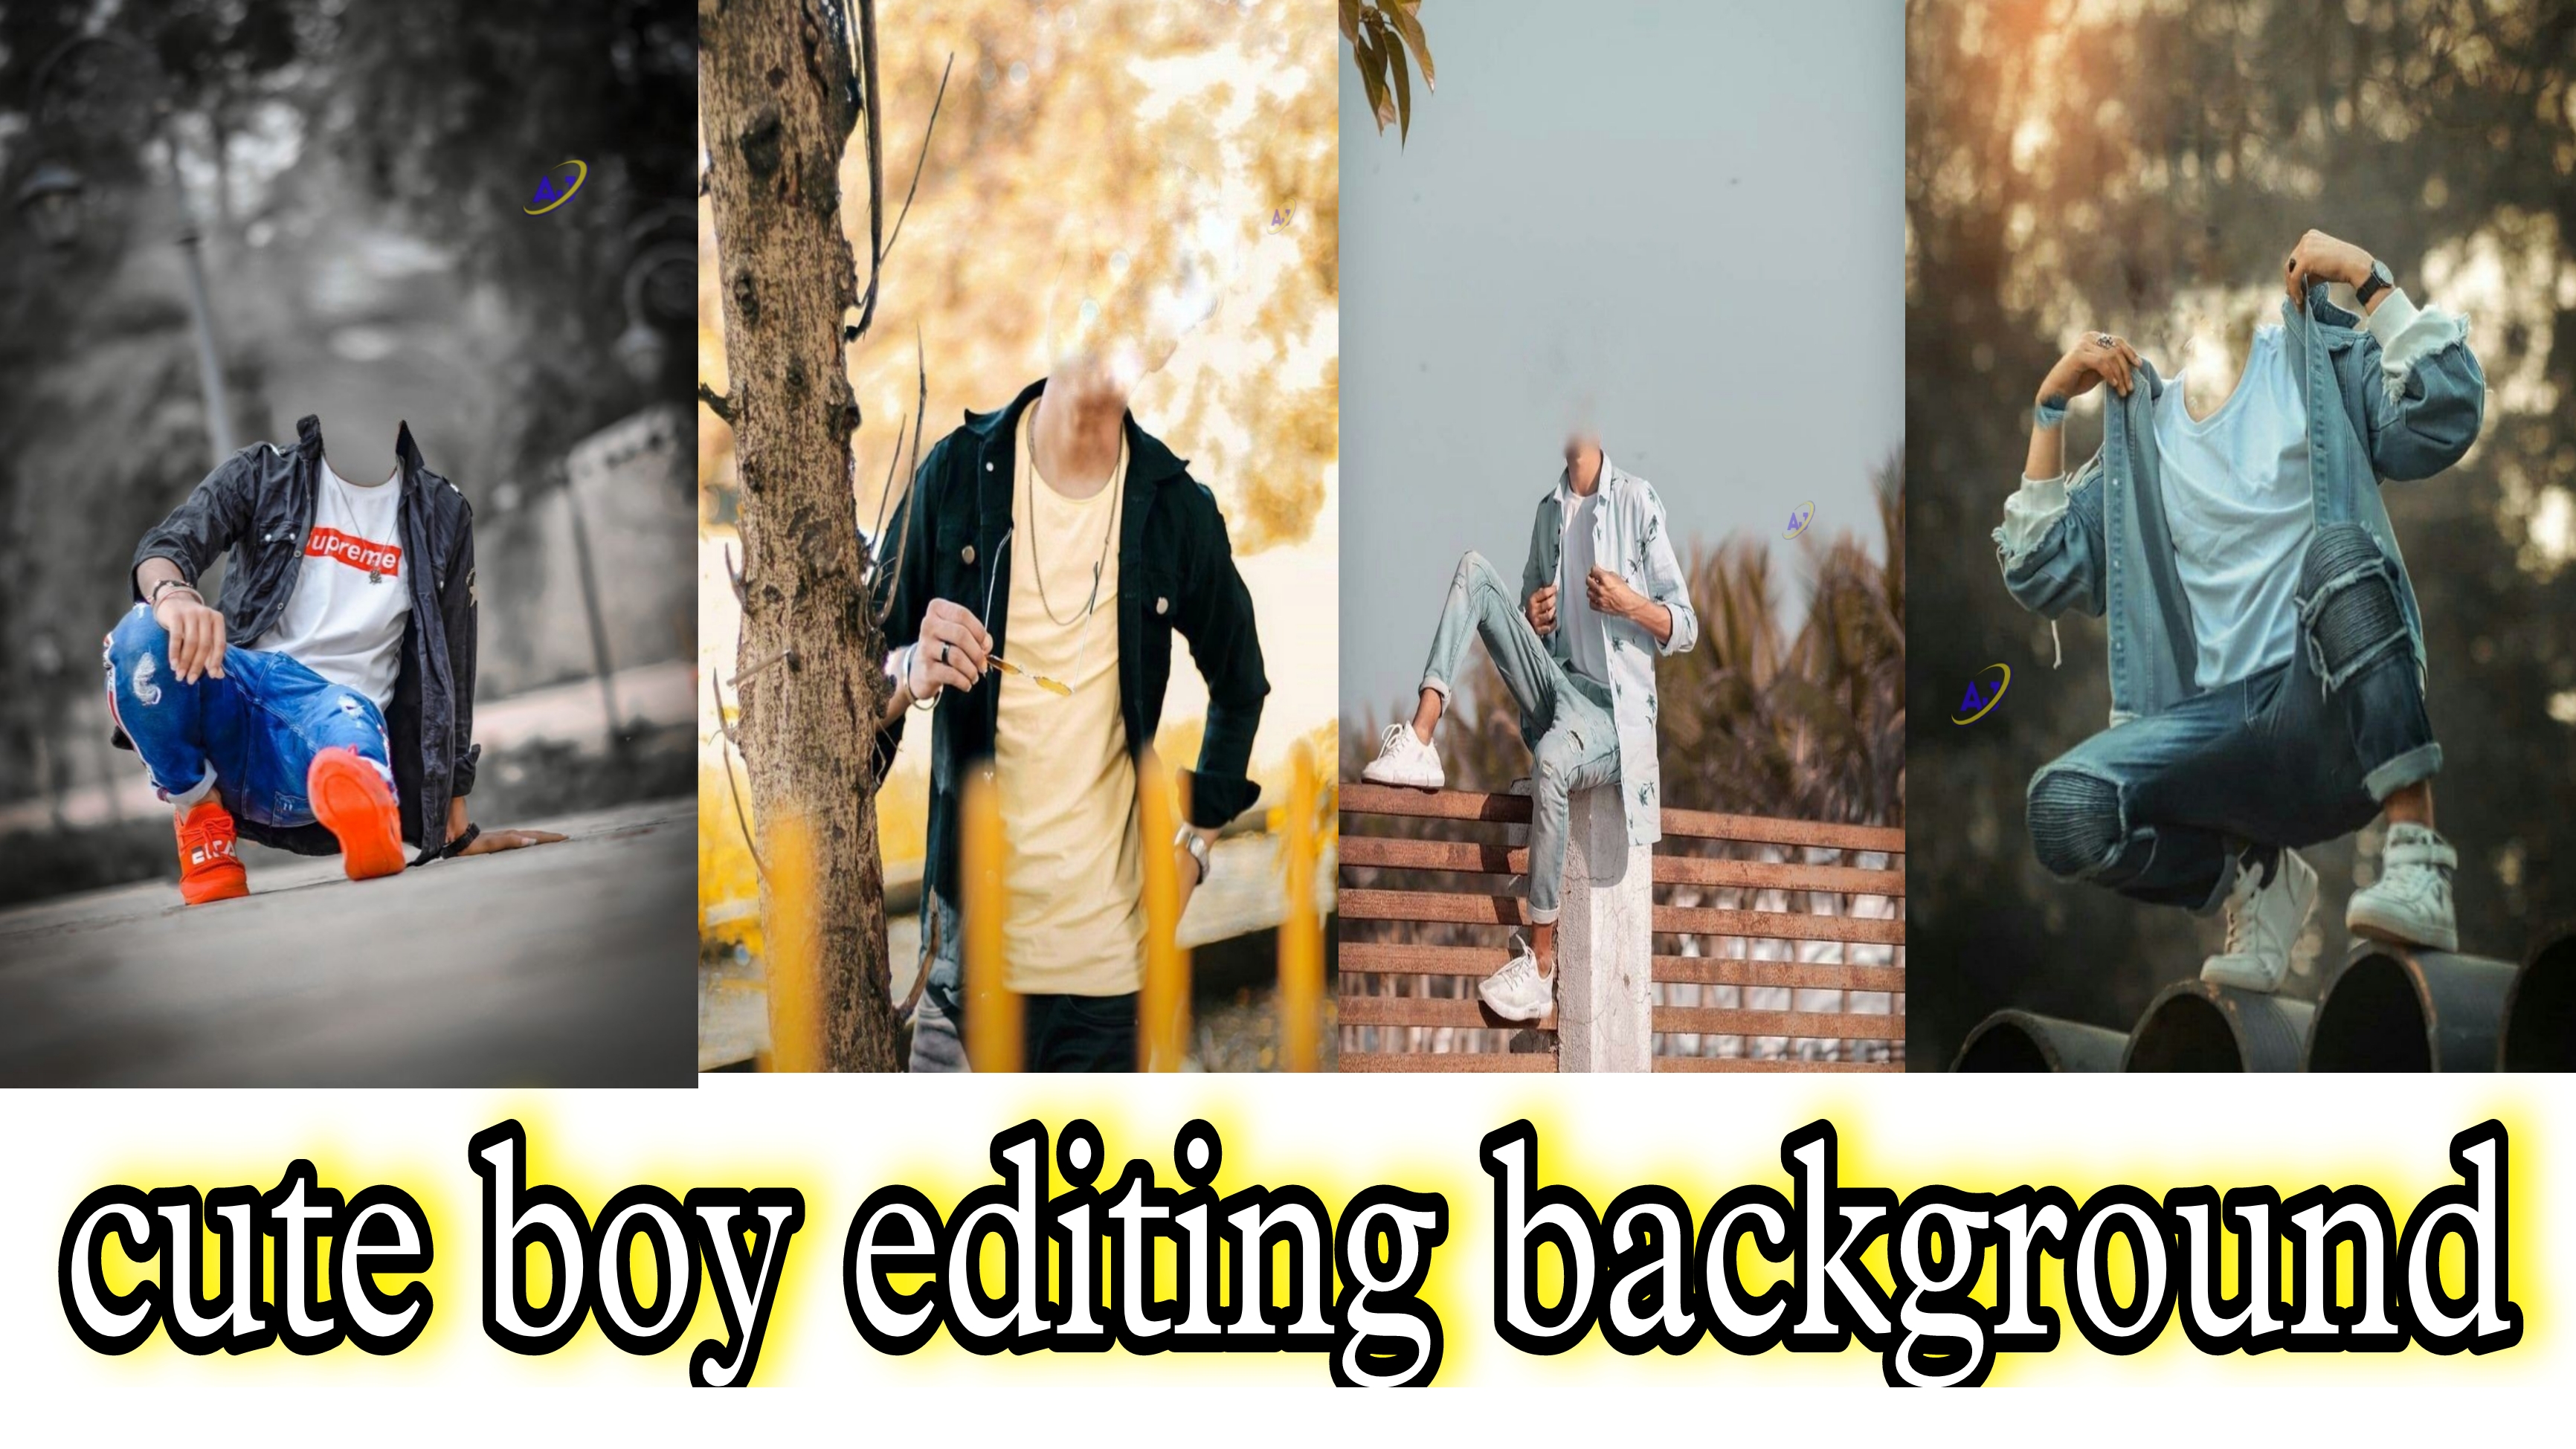 500+cute boy editing background download now | PicsArt background light  room reset free download